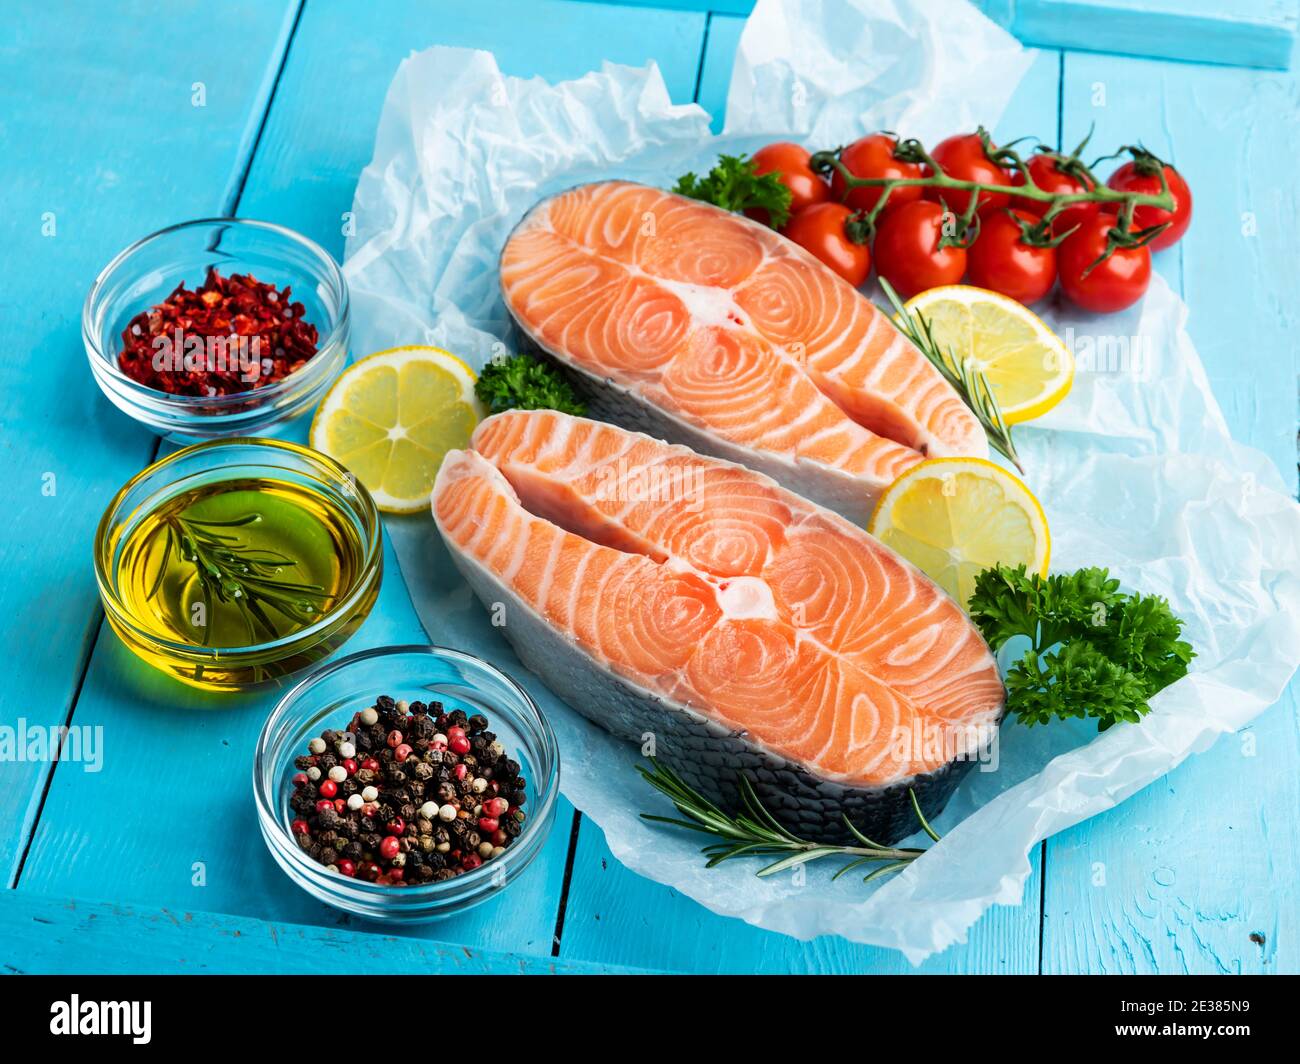 two raw steak fish trout, salmon and spices on a blue wooden background Stock Photo